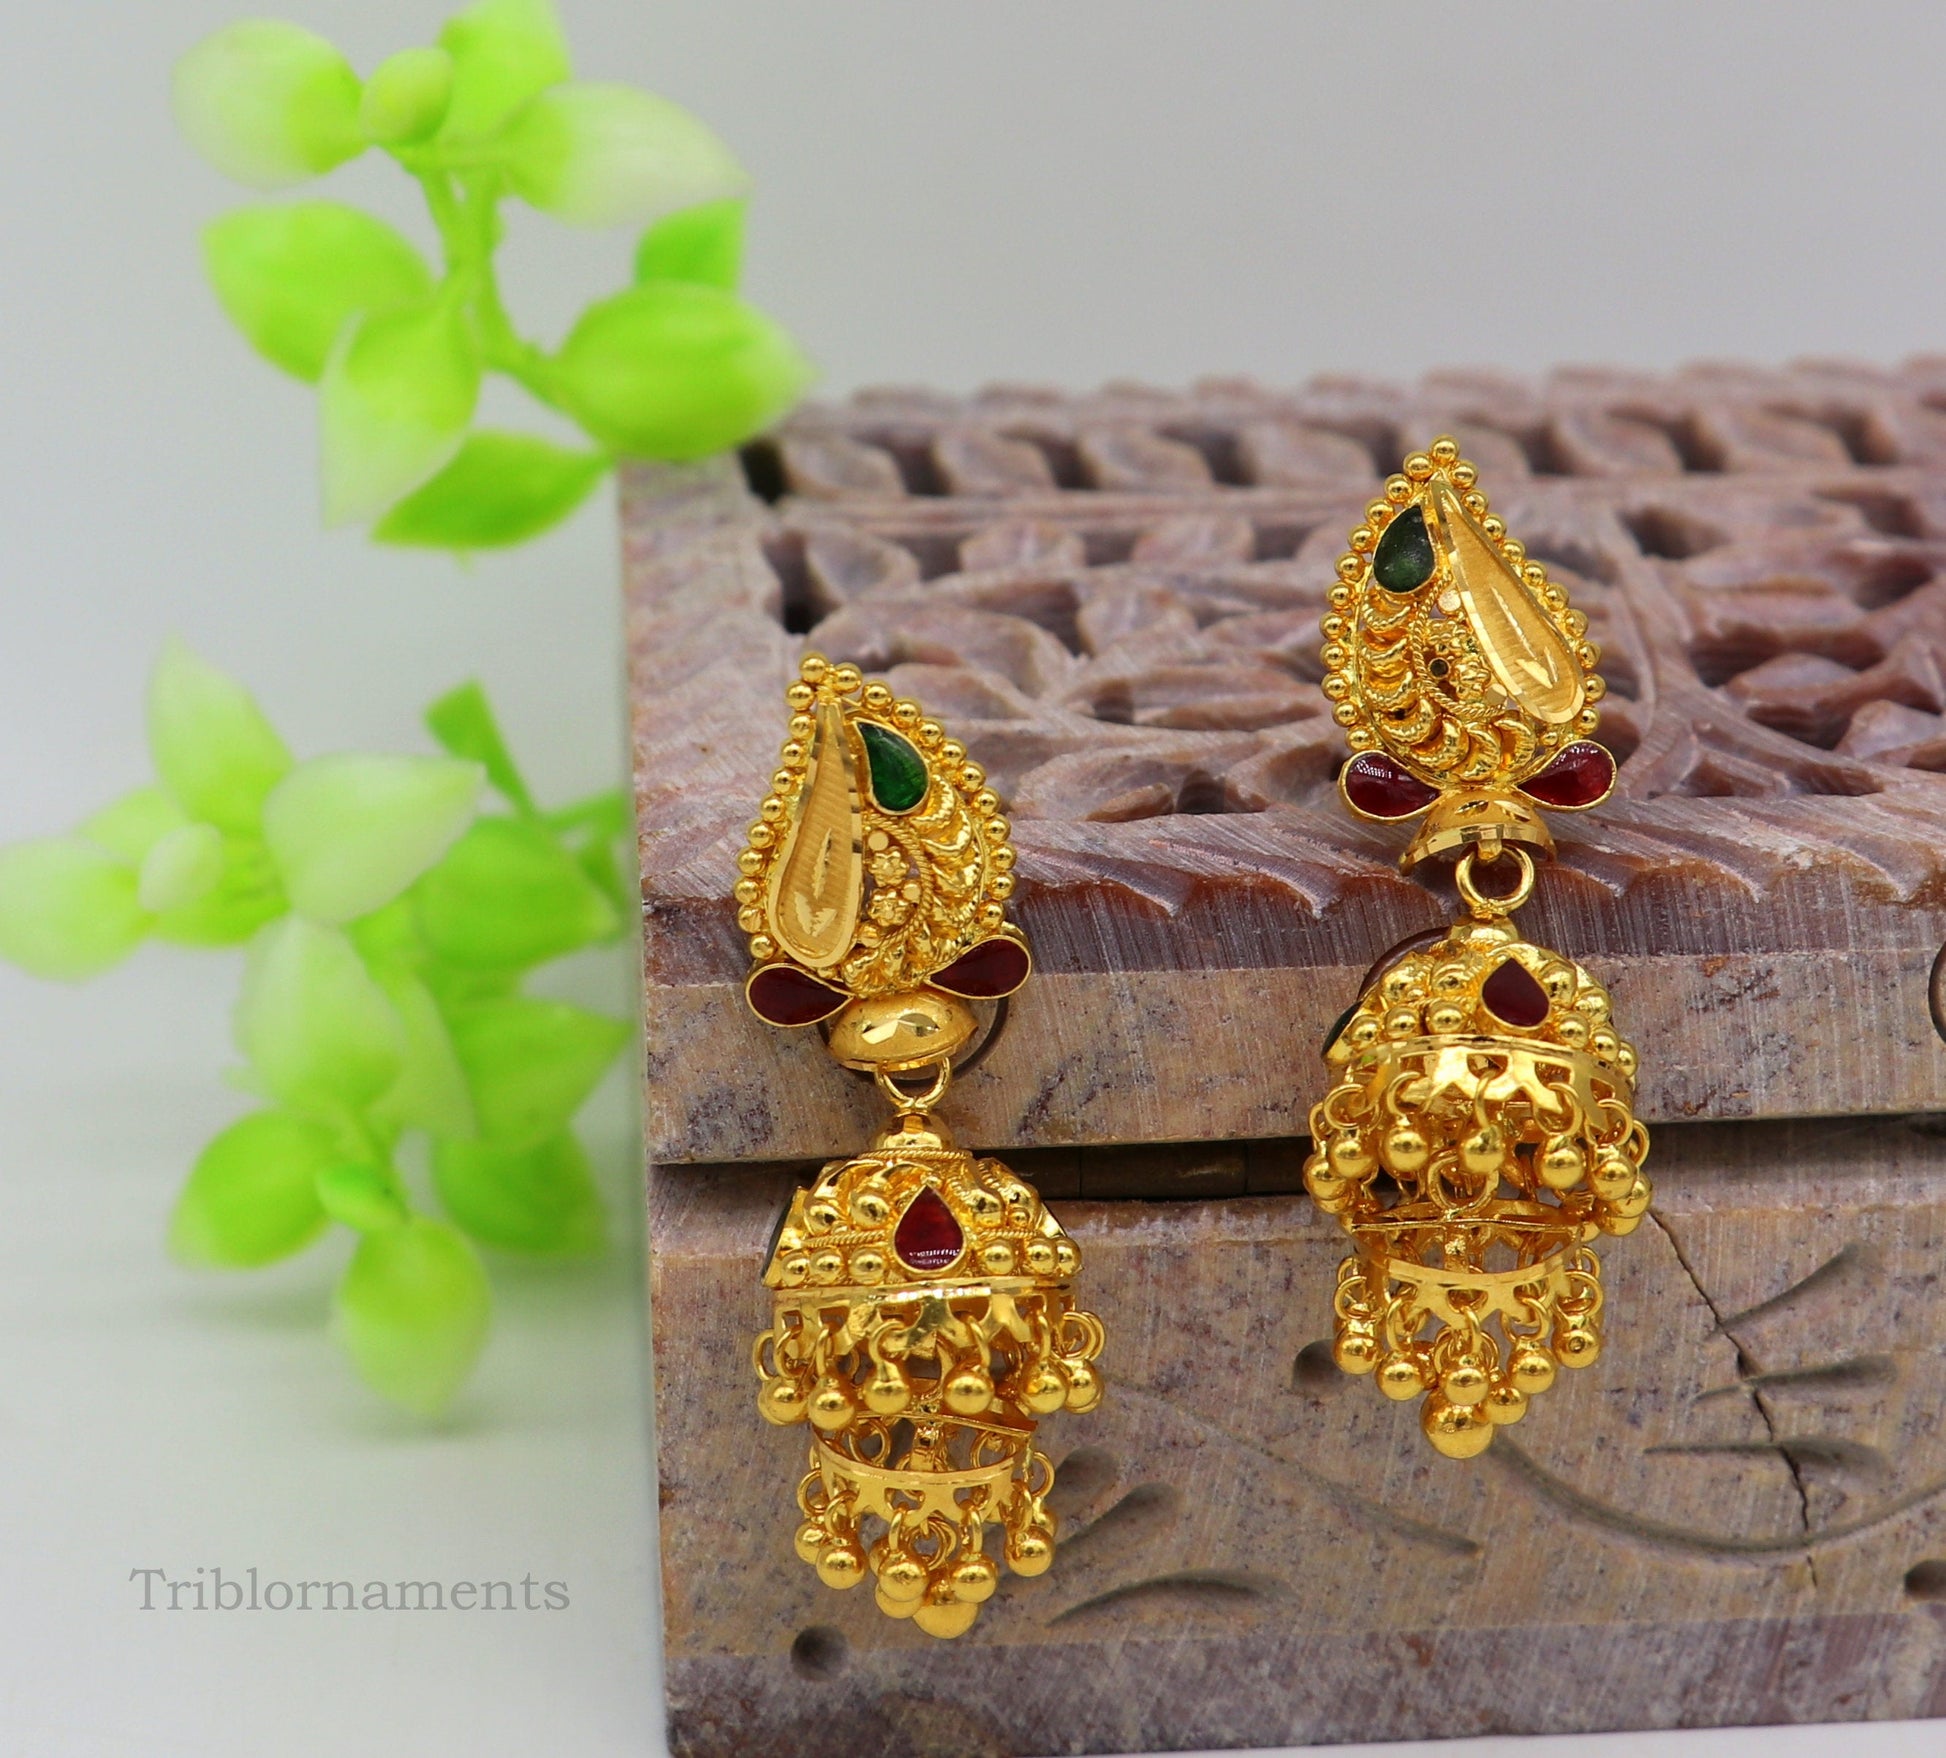 2 Gram Under Gold Stud Earrings Designs With Price, Gold Earrings